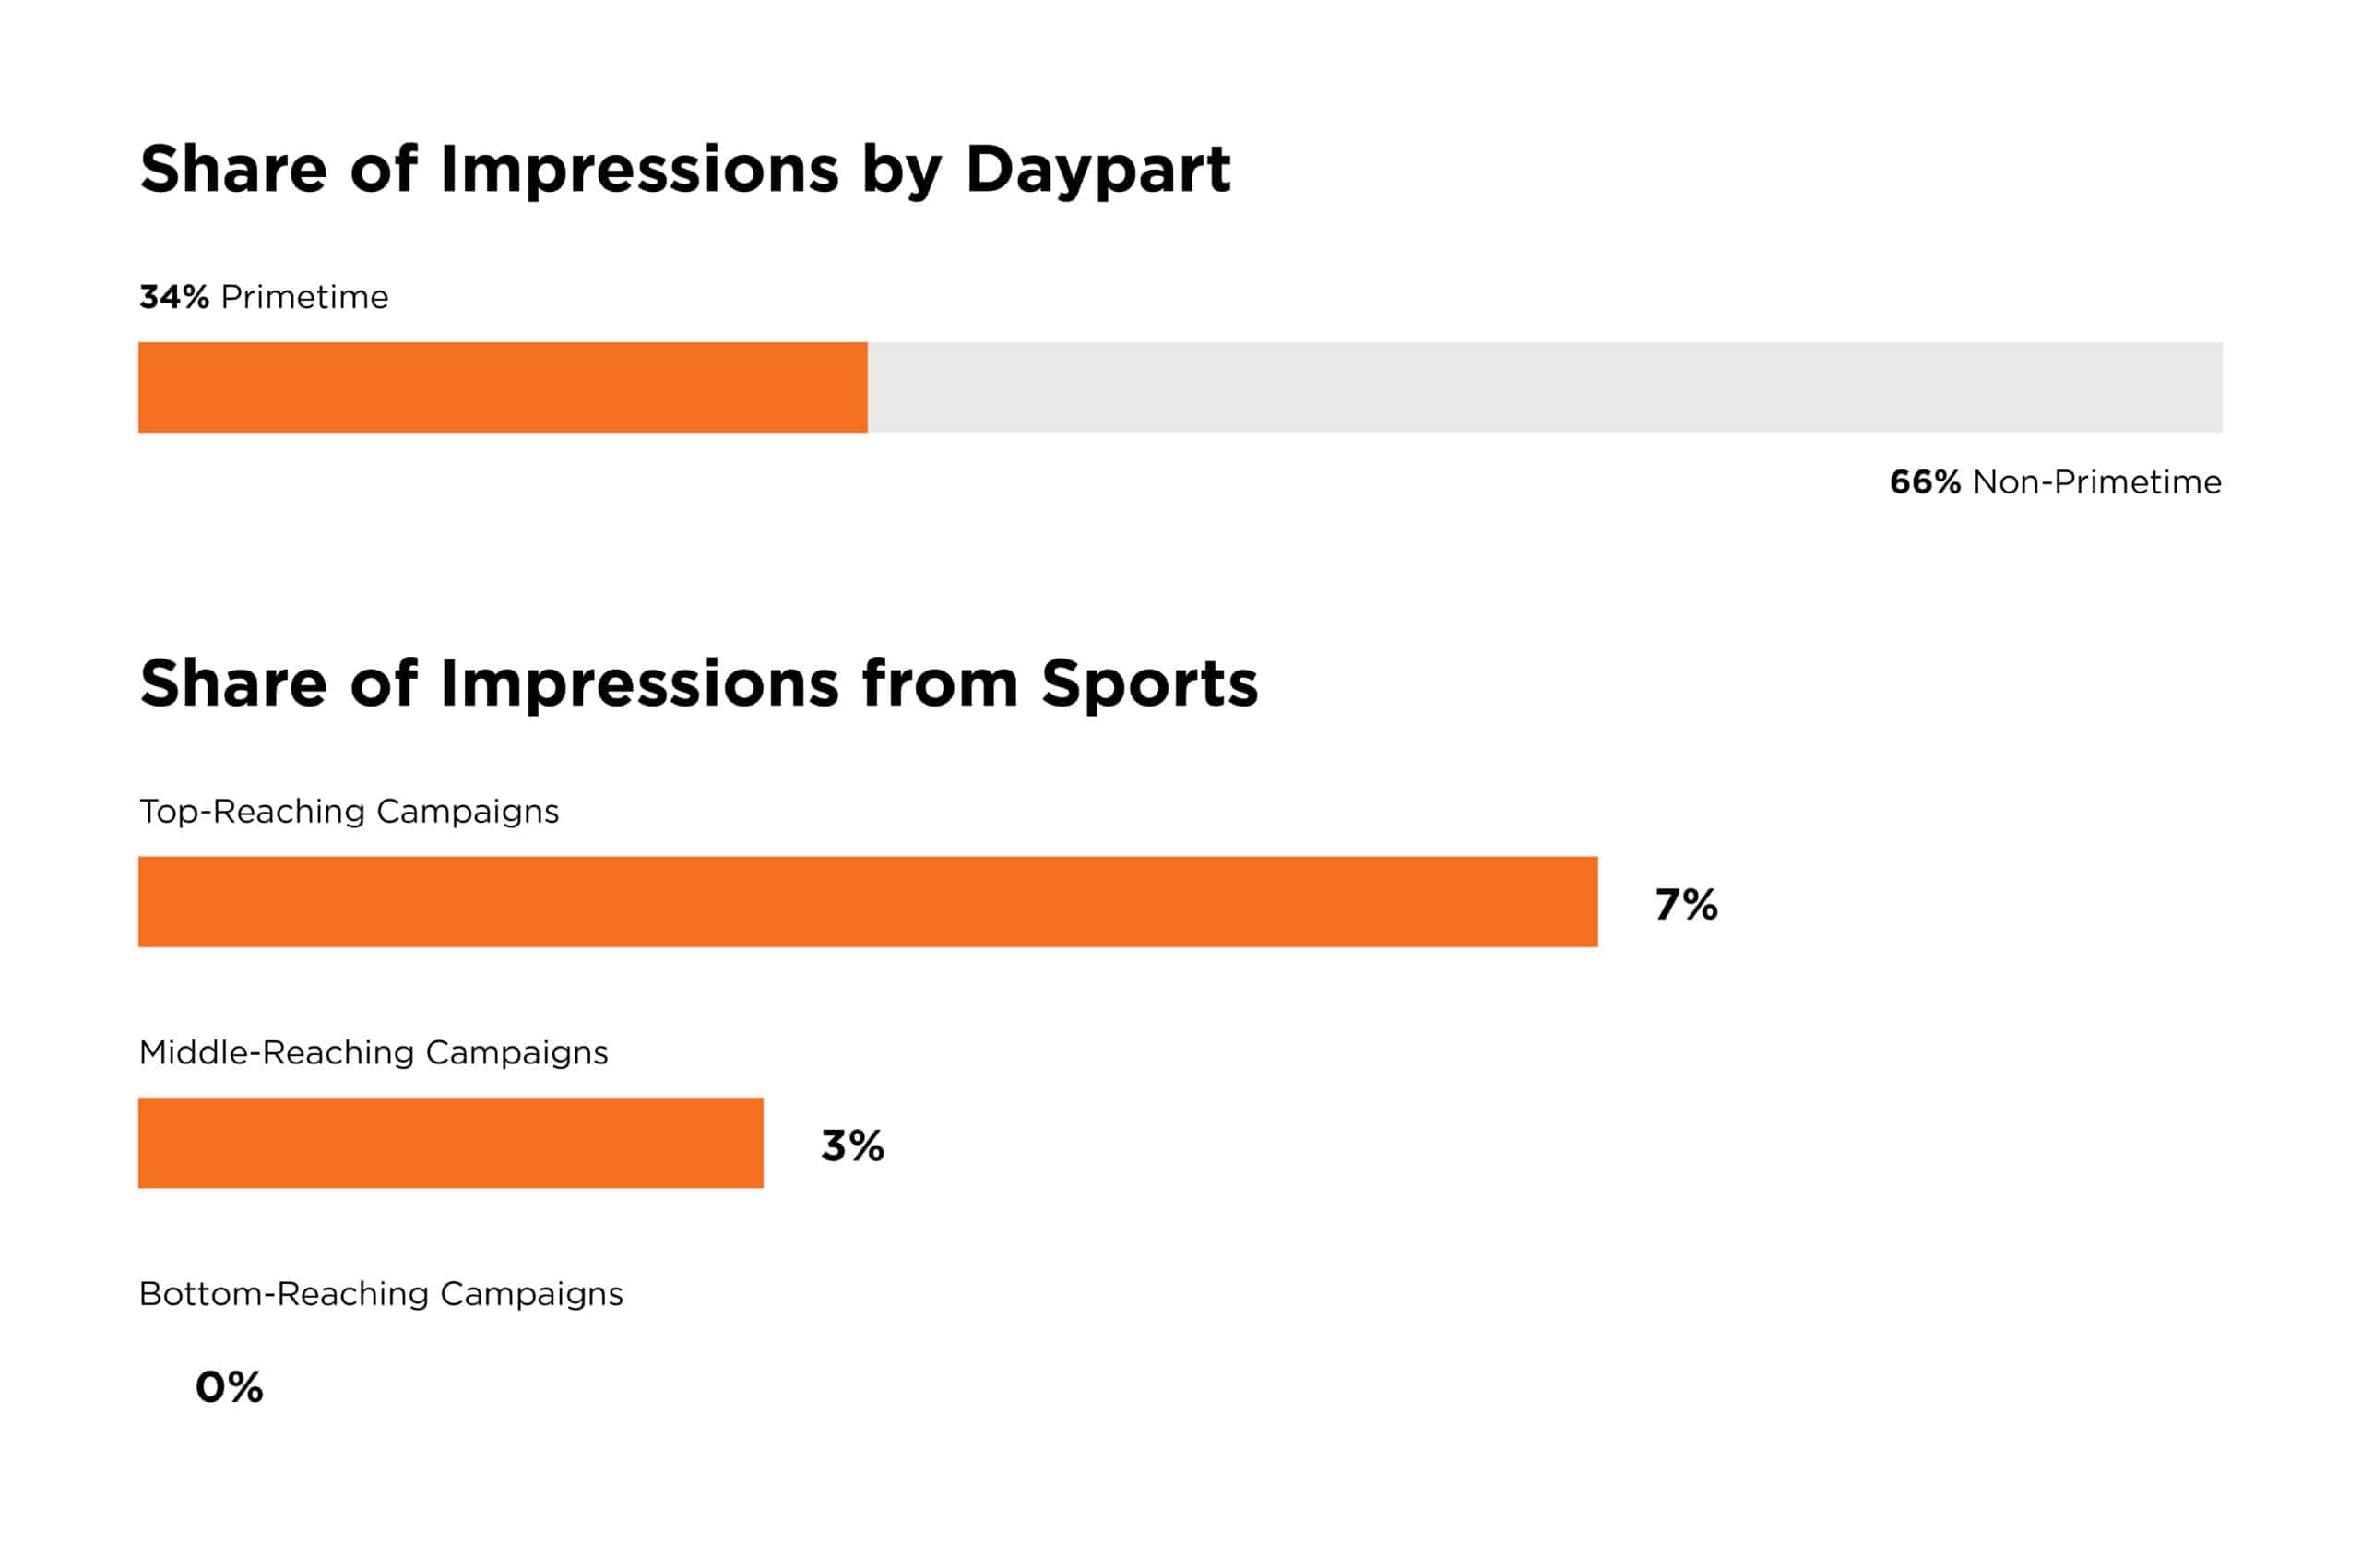 Two bar charts, the top one shows share of impressions by daypart with 34% primetime. The bottom chart shows share of impressions from sports, with top-reaching campaigns at 7%.